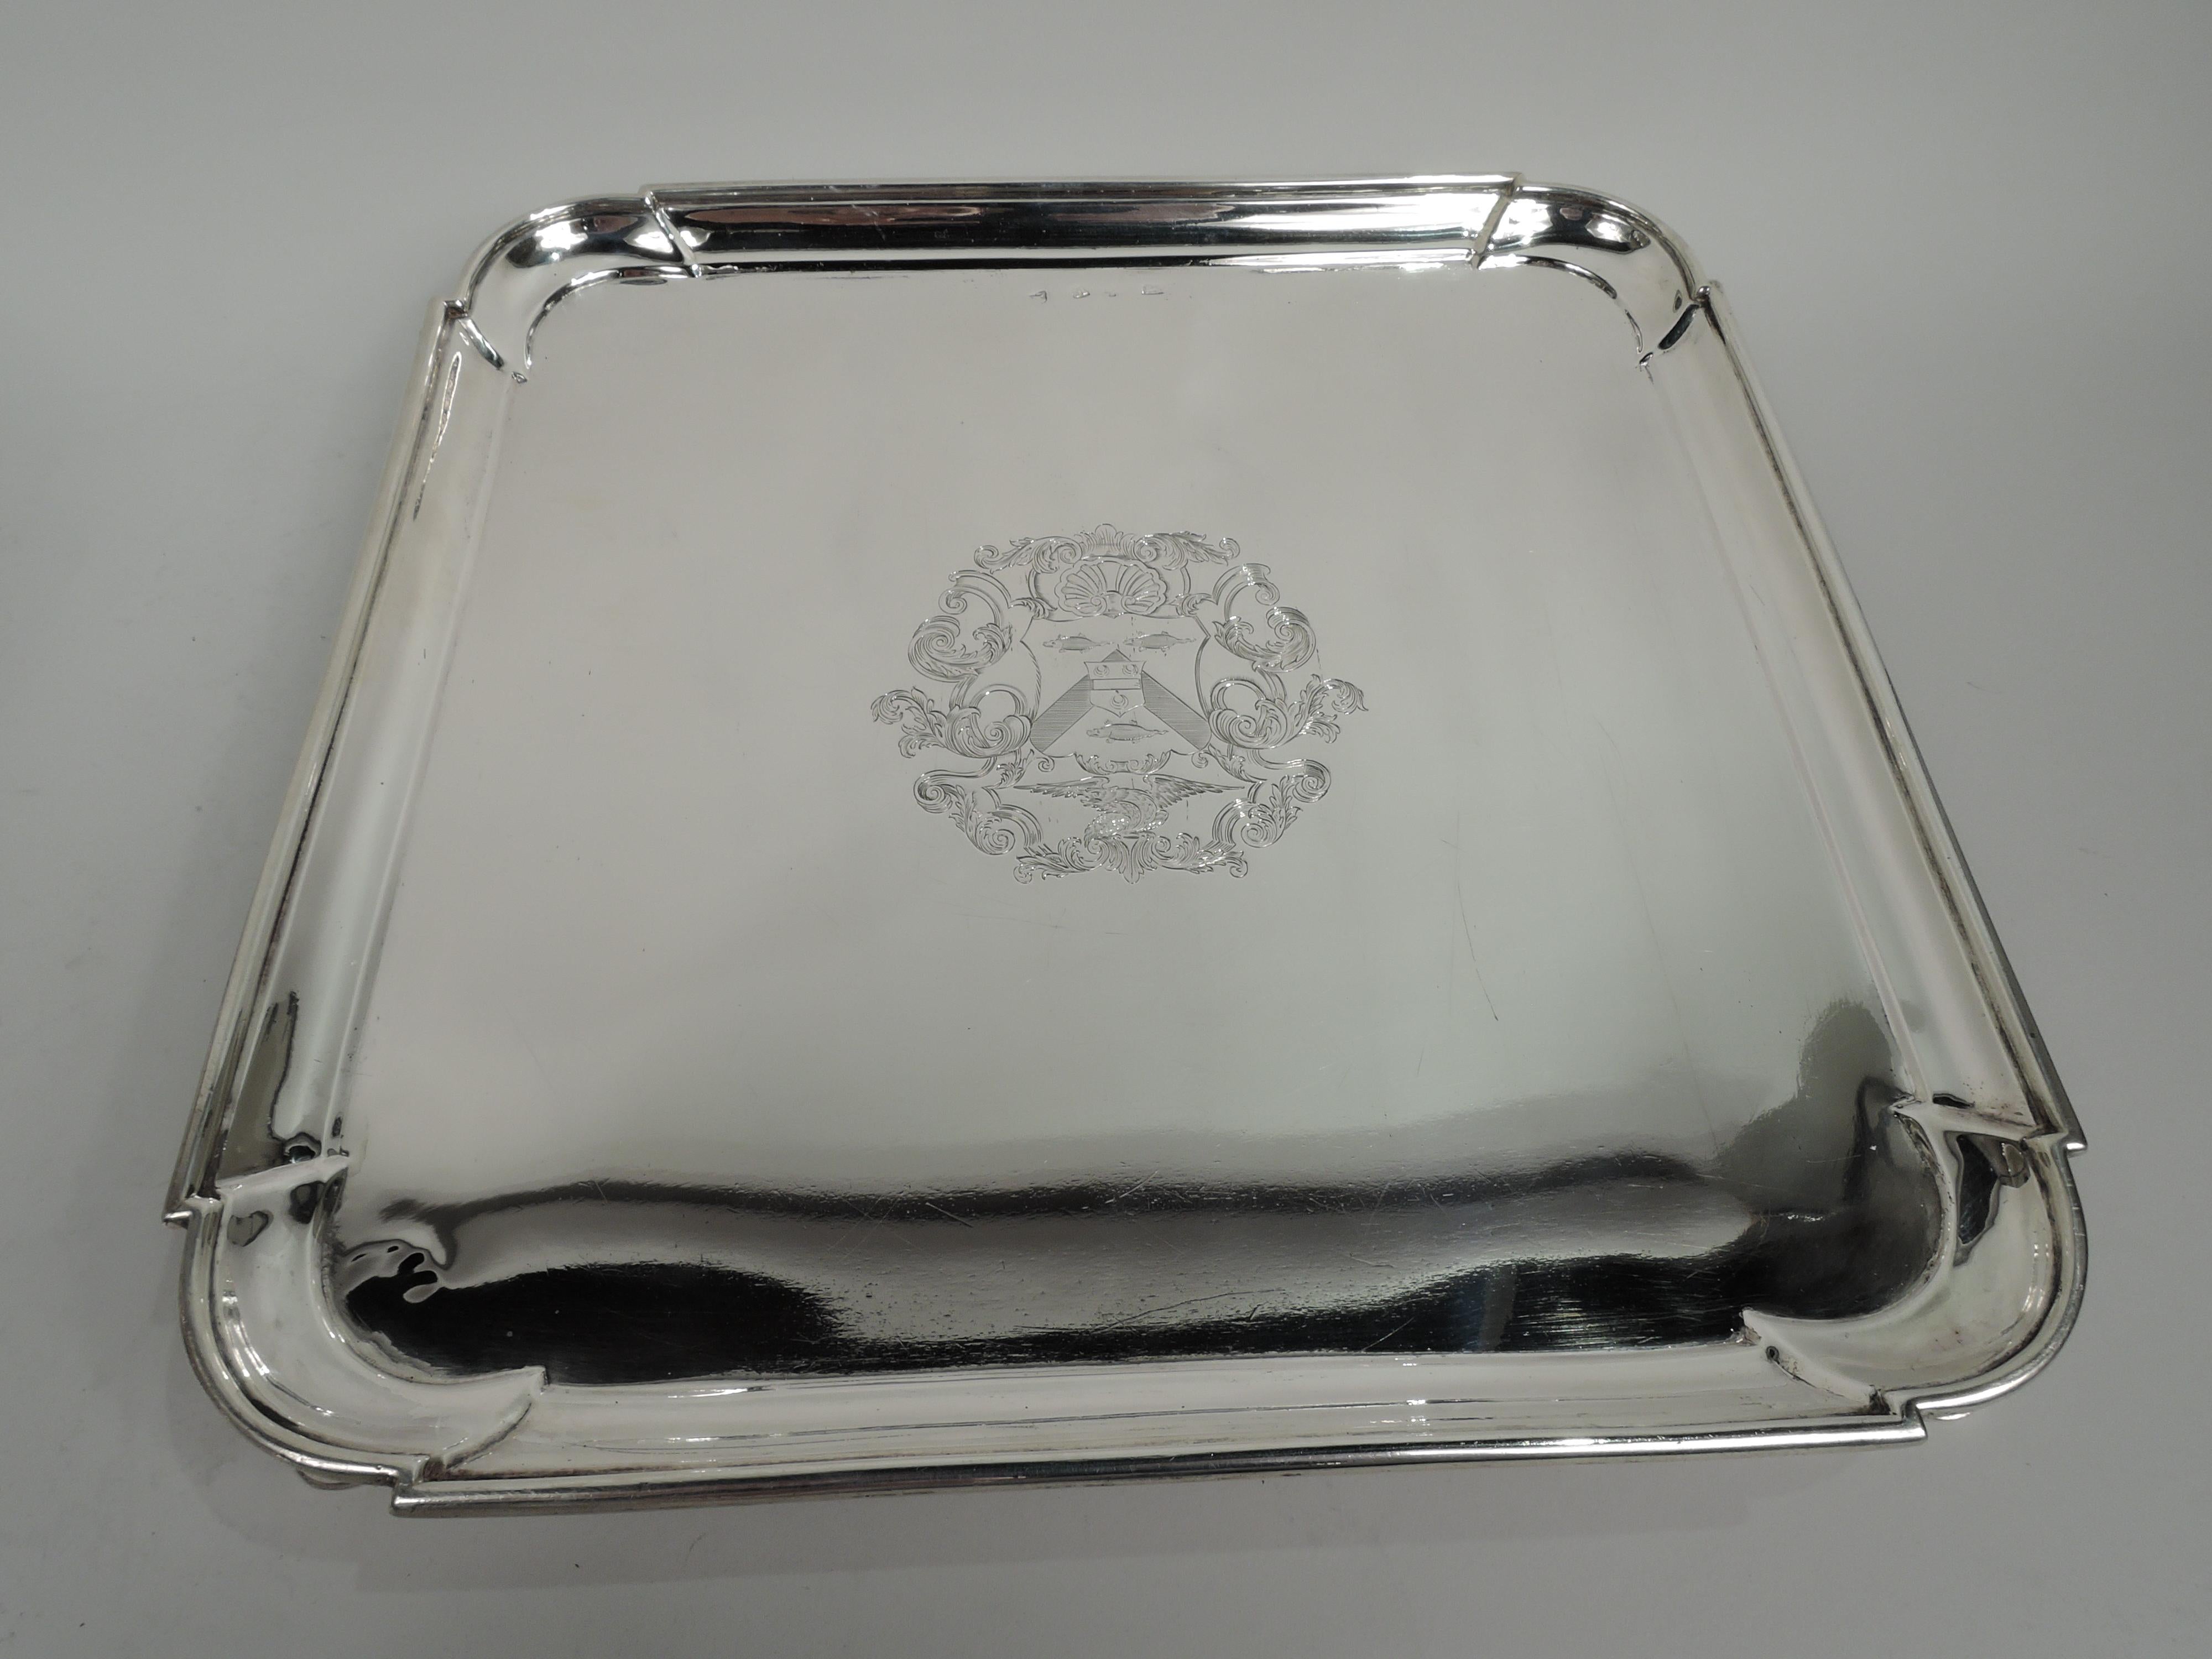 English Georgian sterling silver salver, 1727. Square with molded rim and curvilinear corners. Engraved armorial in well center. Rests on 4 corner hoof supports. Substantial with nice heft from the year the first Hanoverian king George I died and